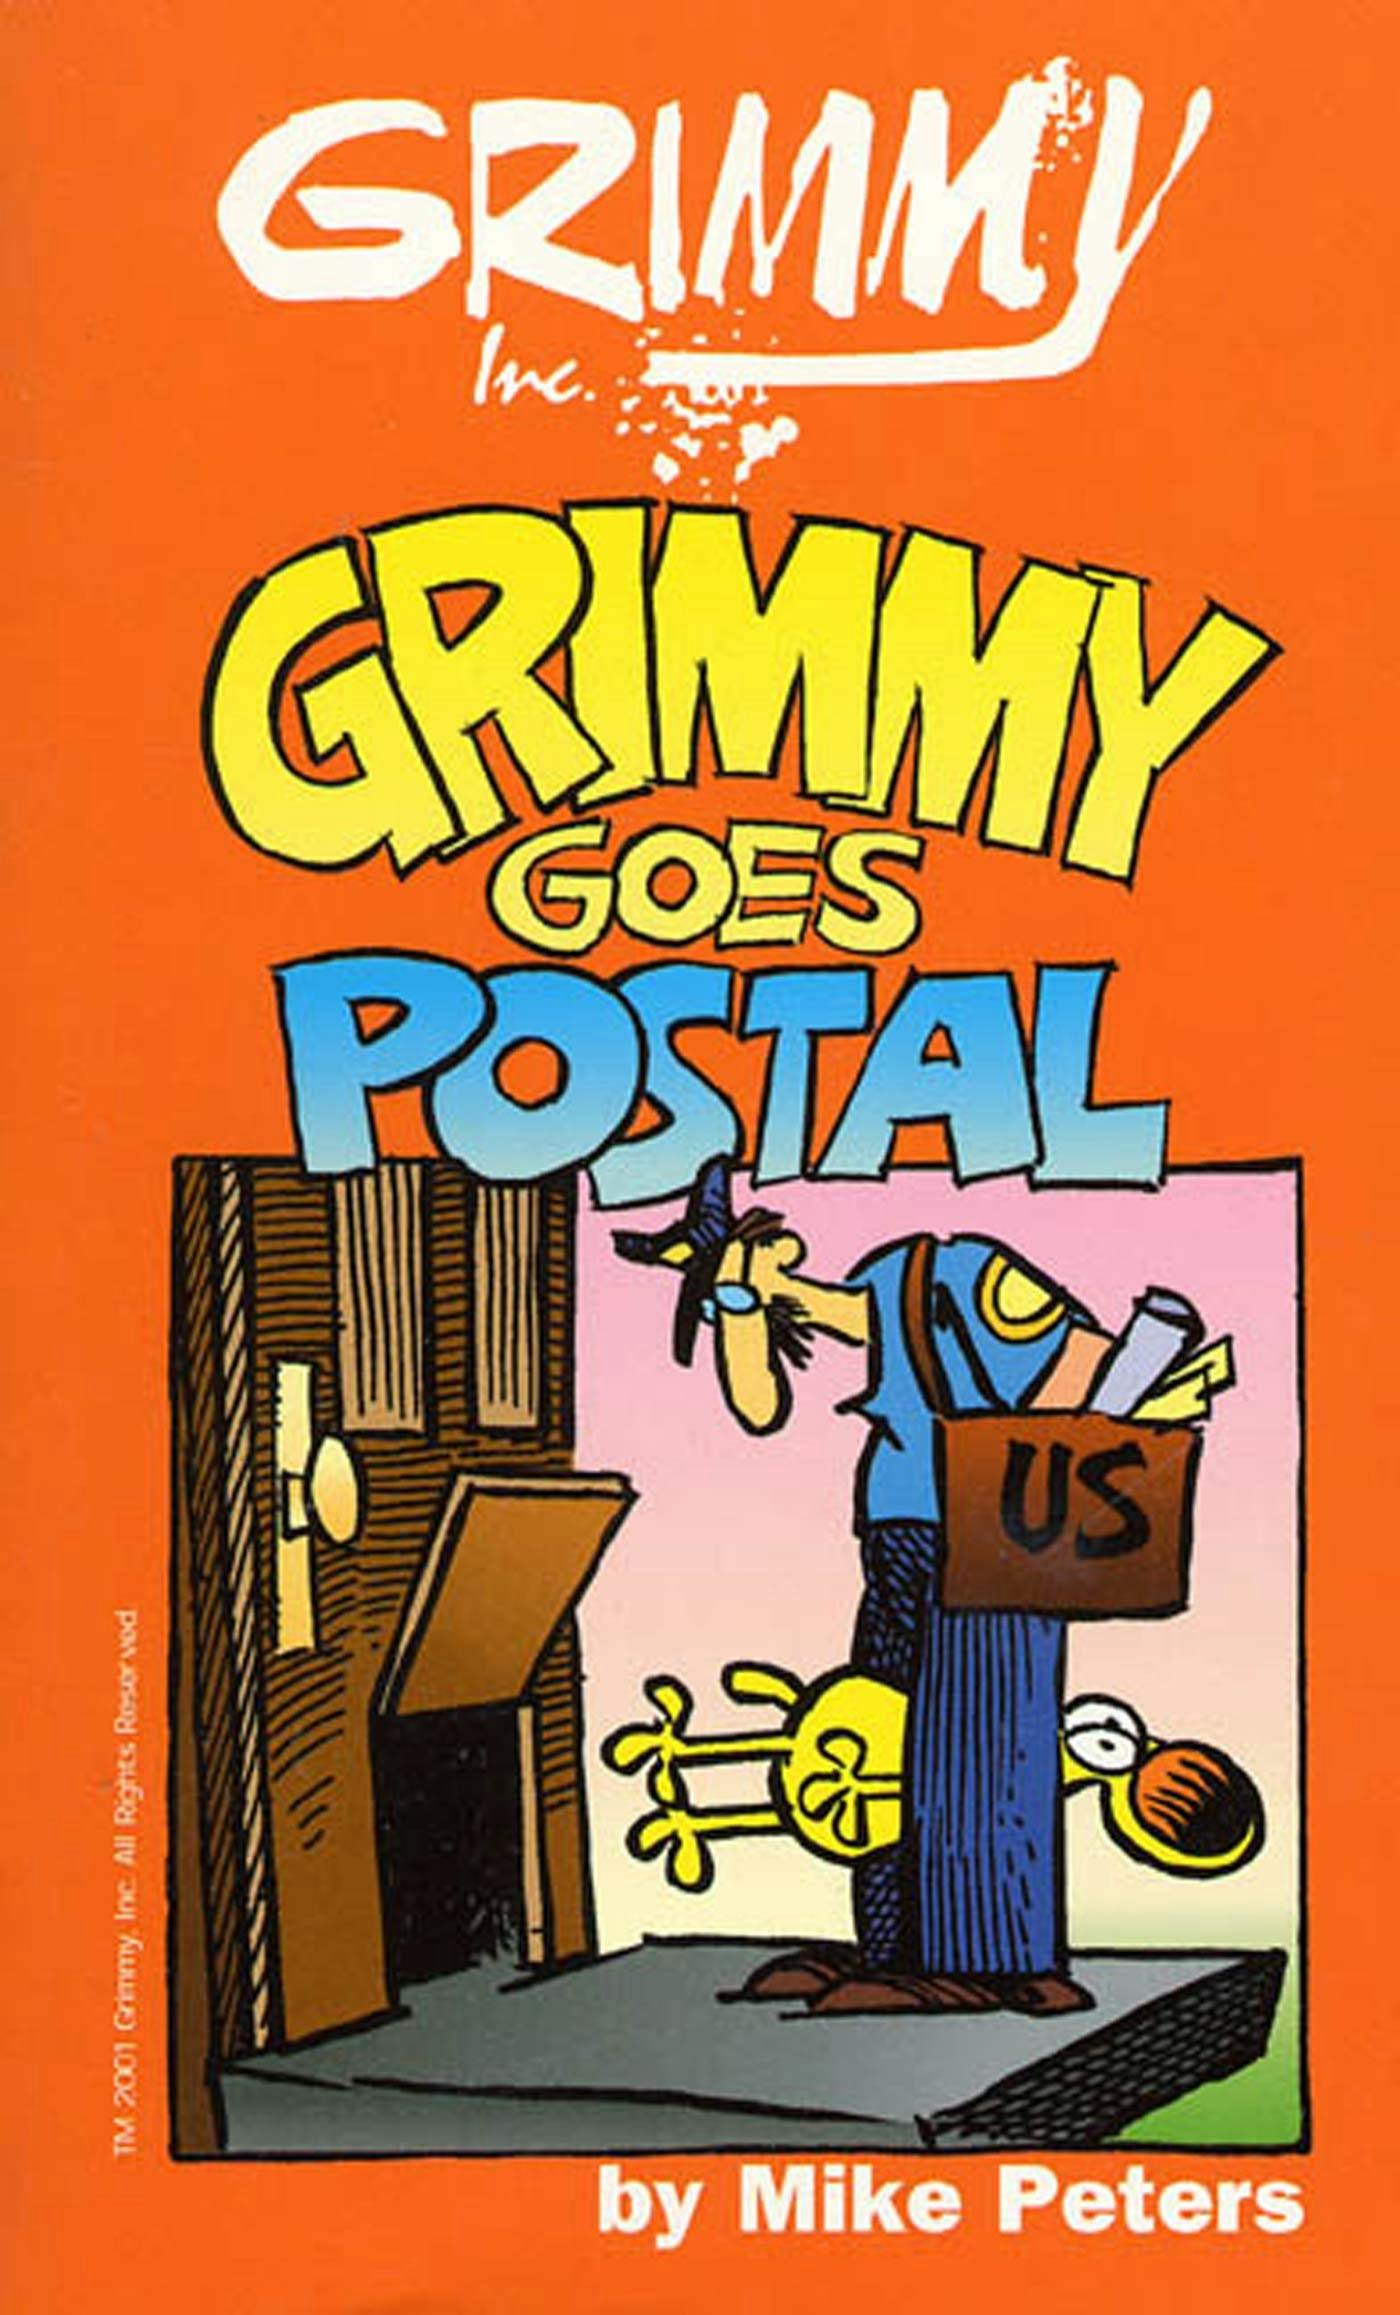 Cover for the book titled as: Grimmy: Grimmy Goes Postal